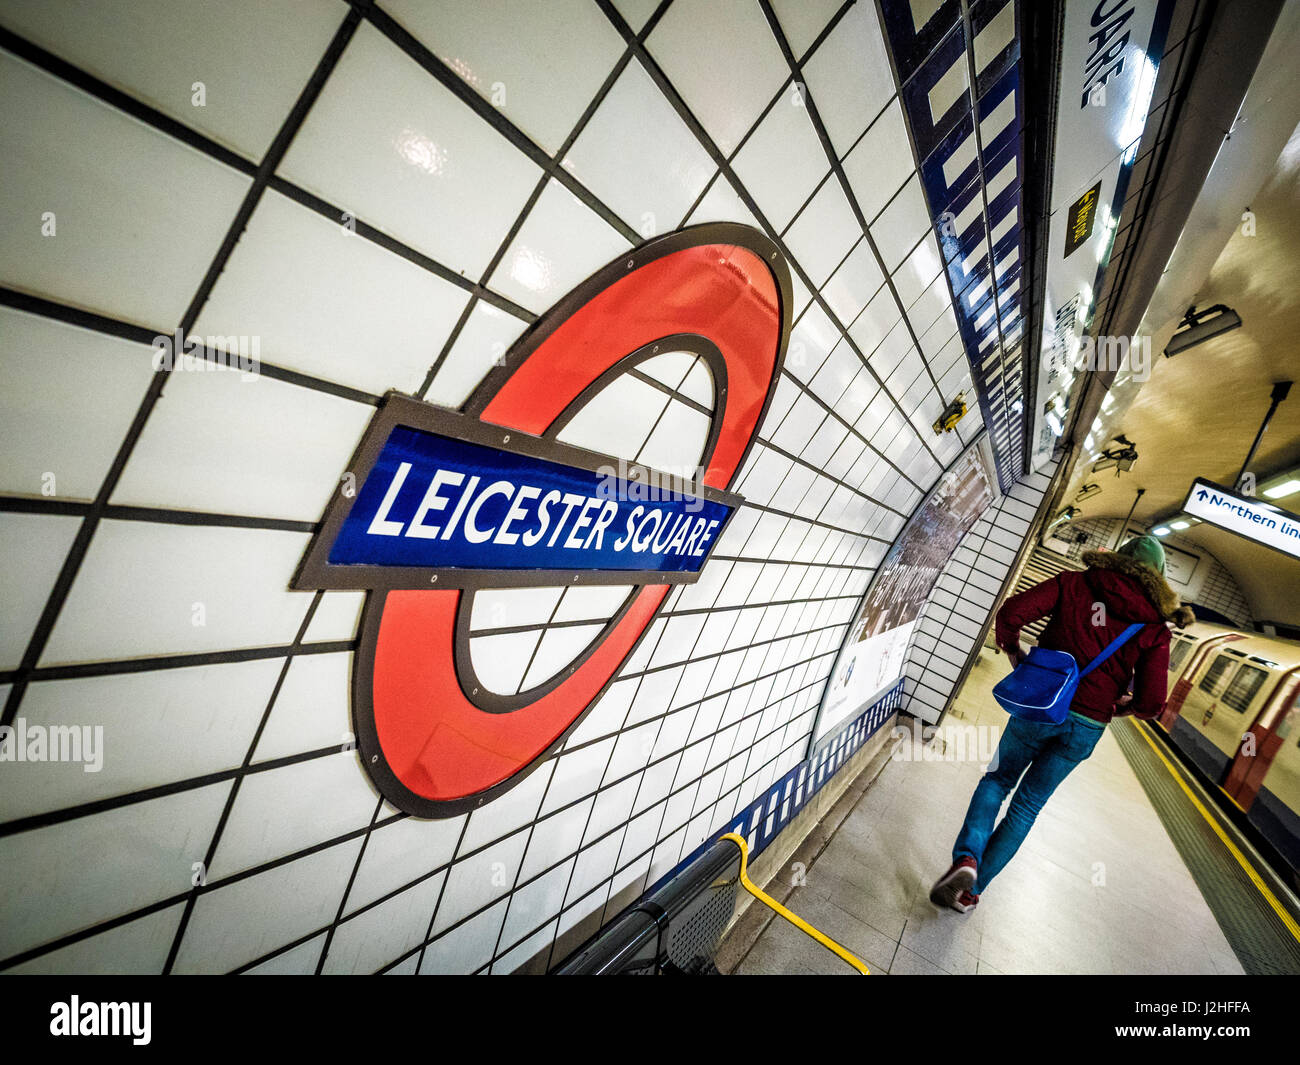 Leicester Square tube station logo on station wall, London, UK. Stock Photo